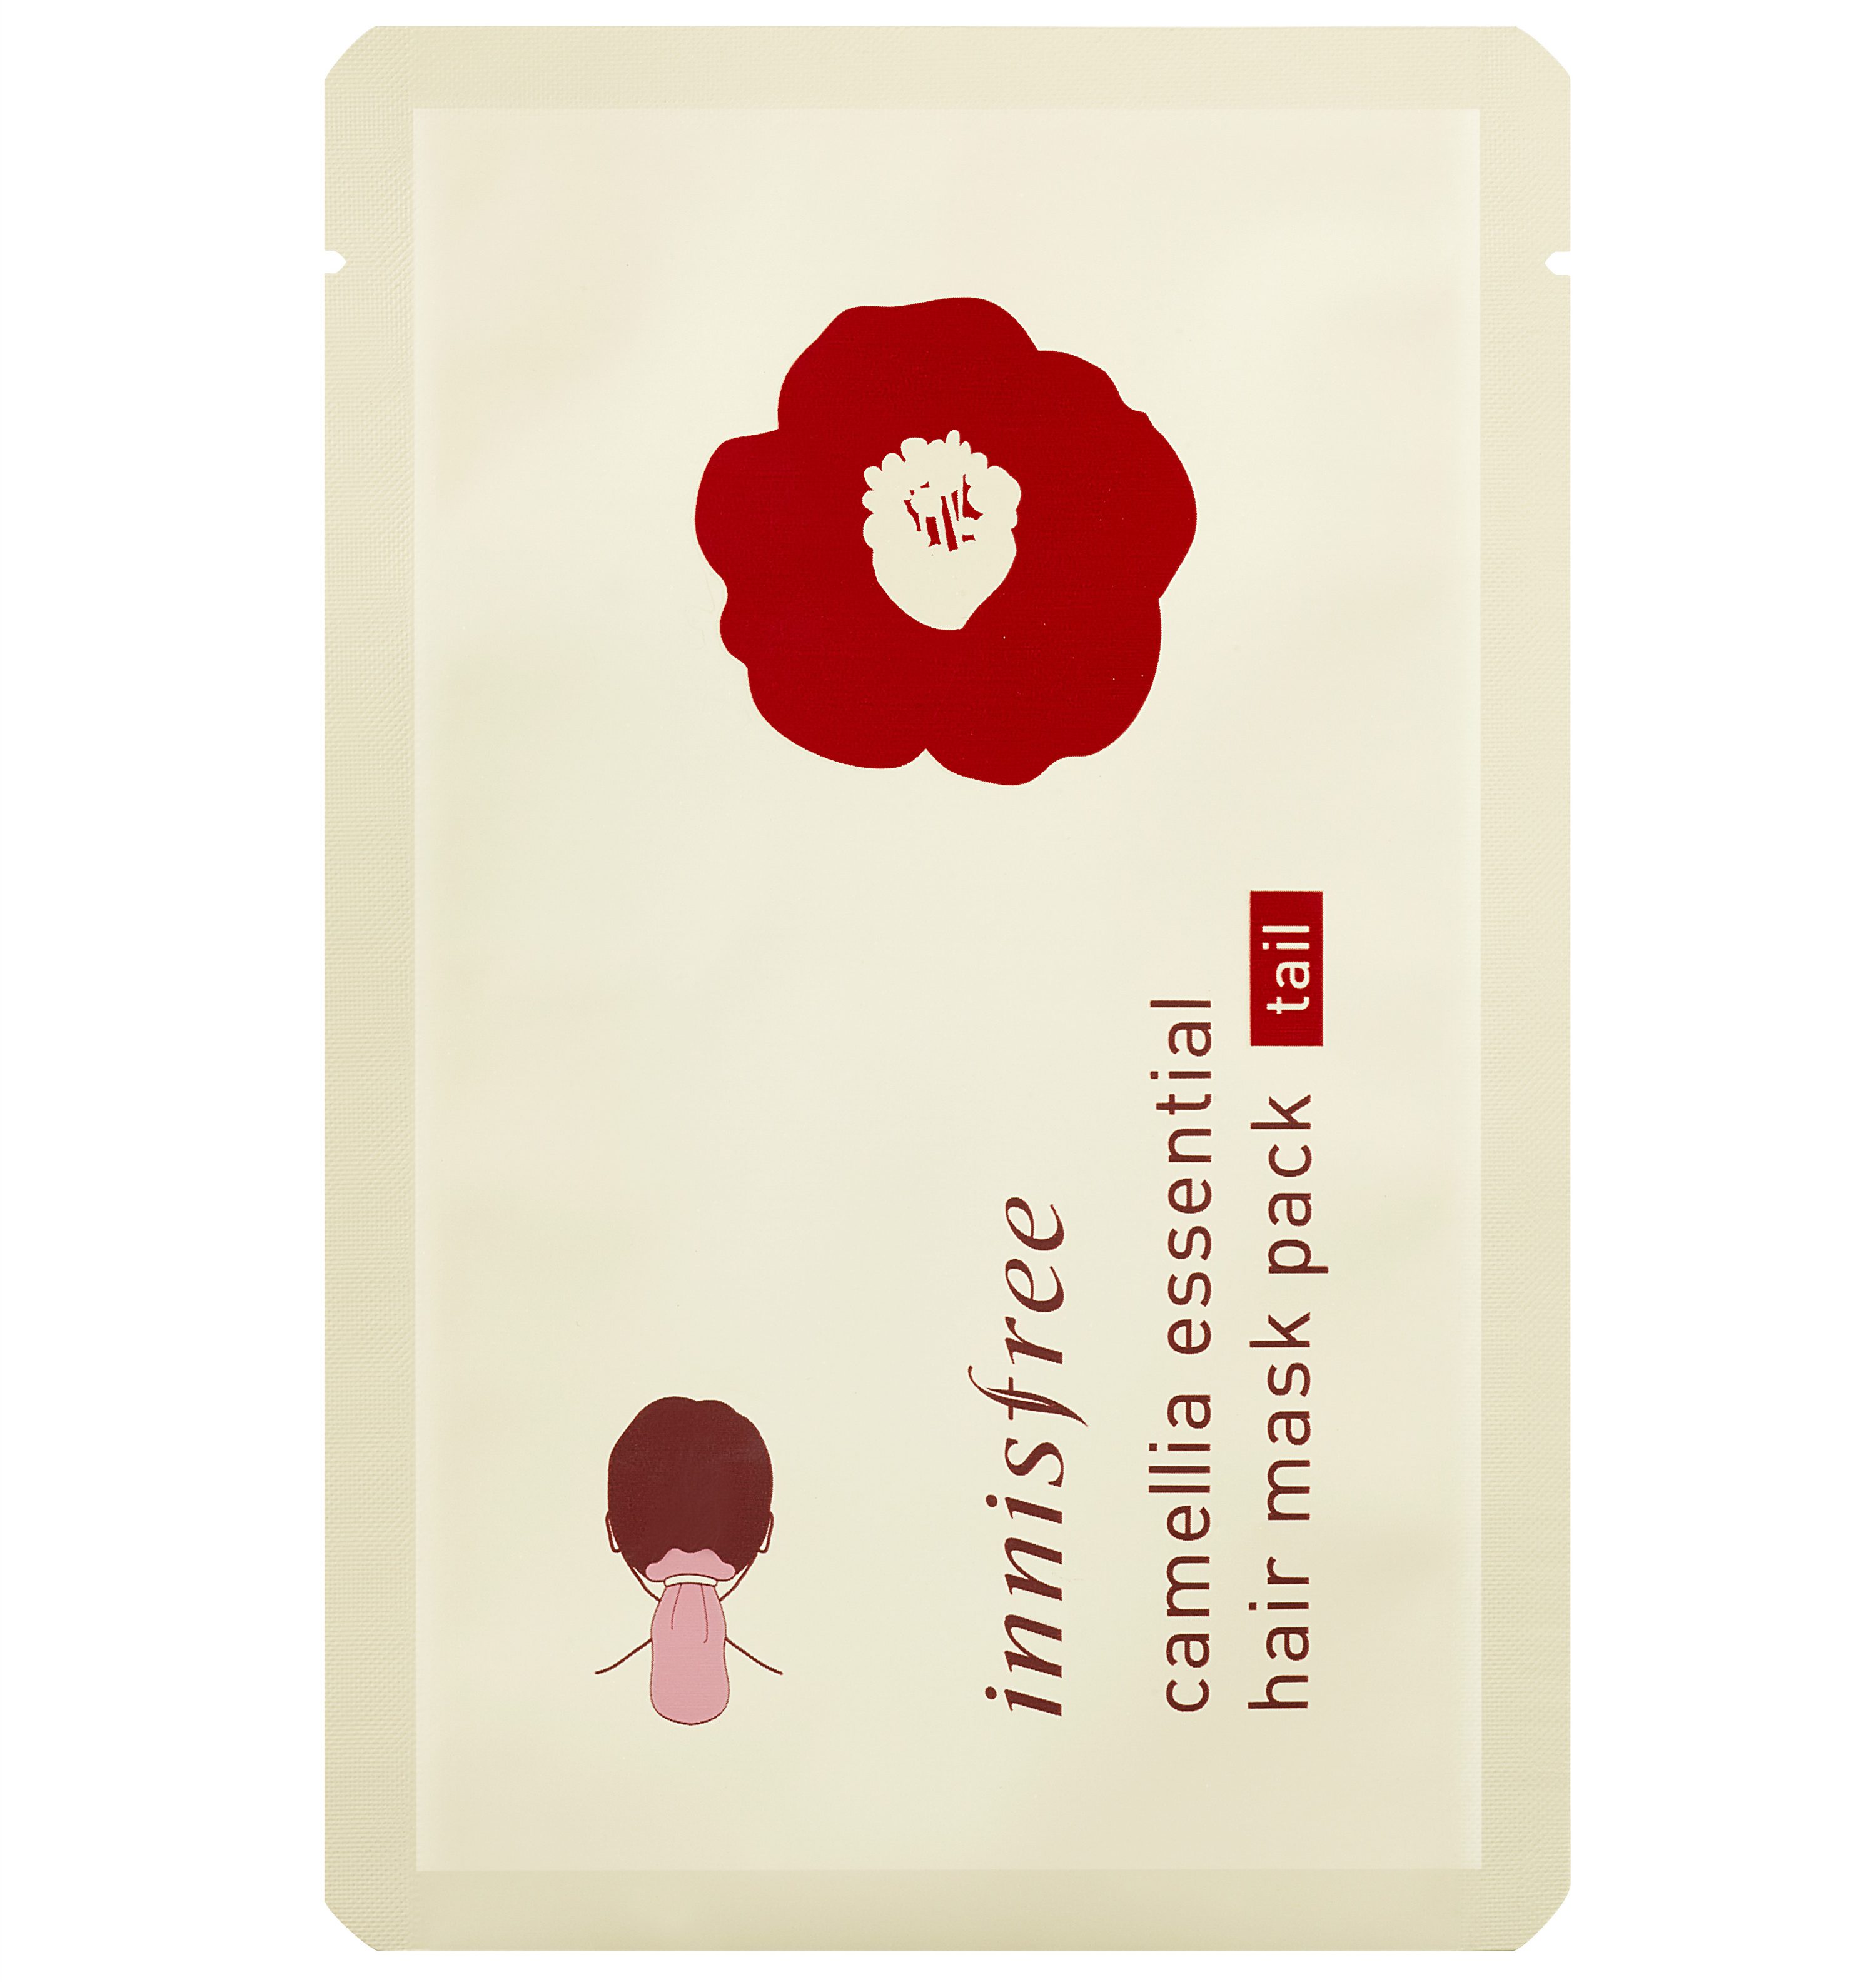 innisfree Camellia Essential Hair Mask Pack [Tail], RM19 (10g)-Pamper.my